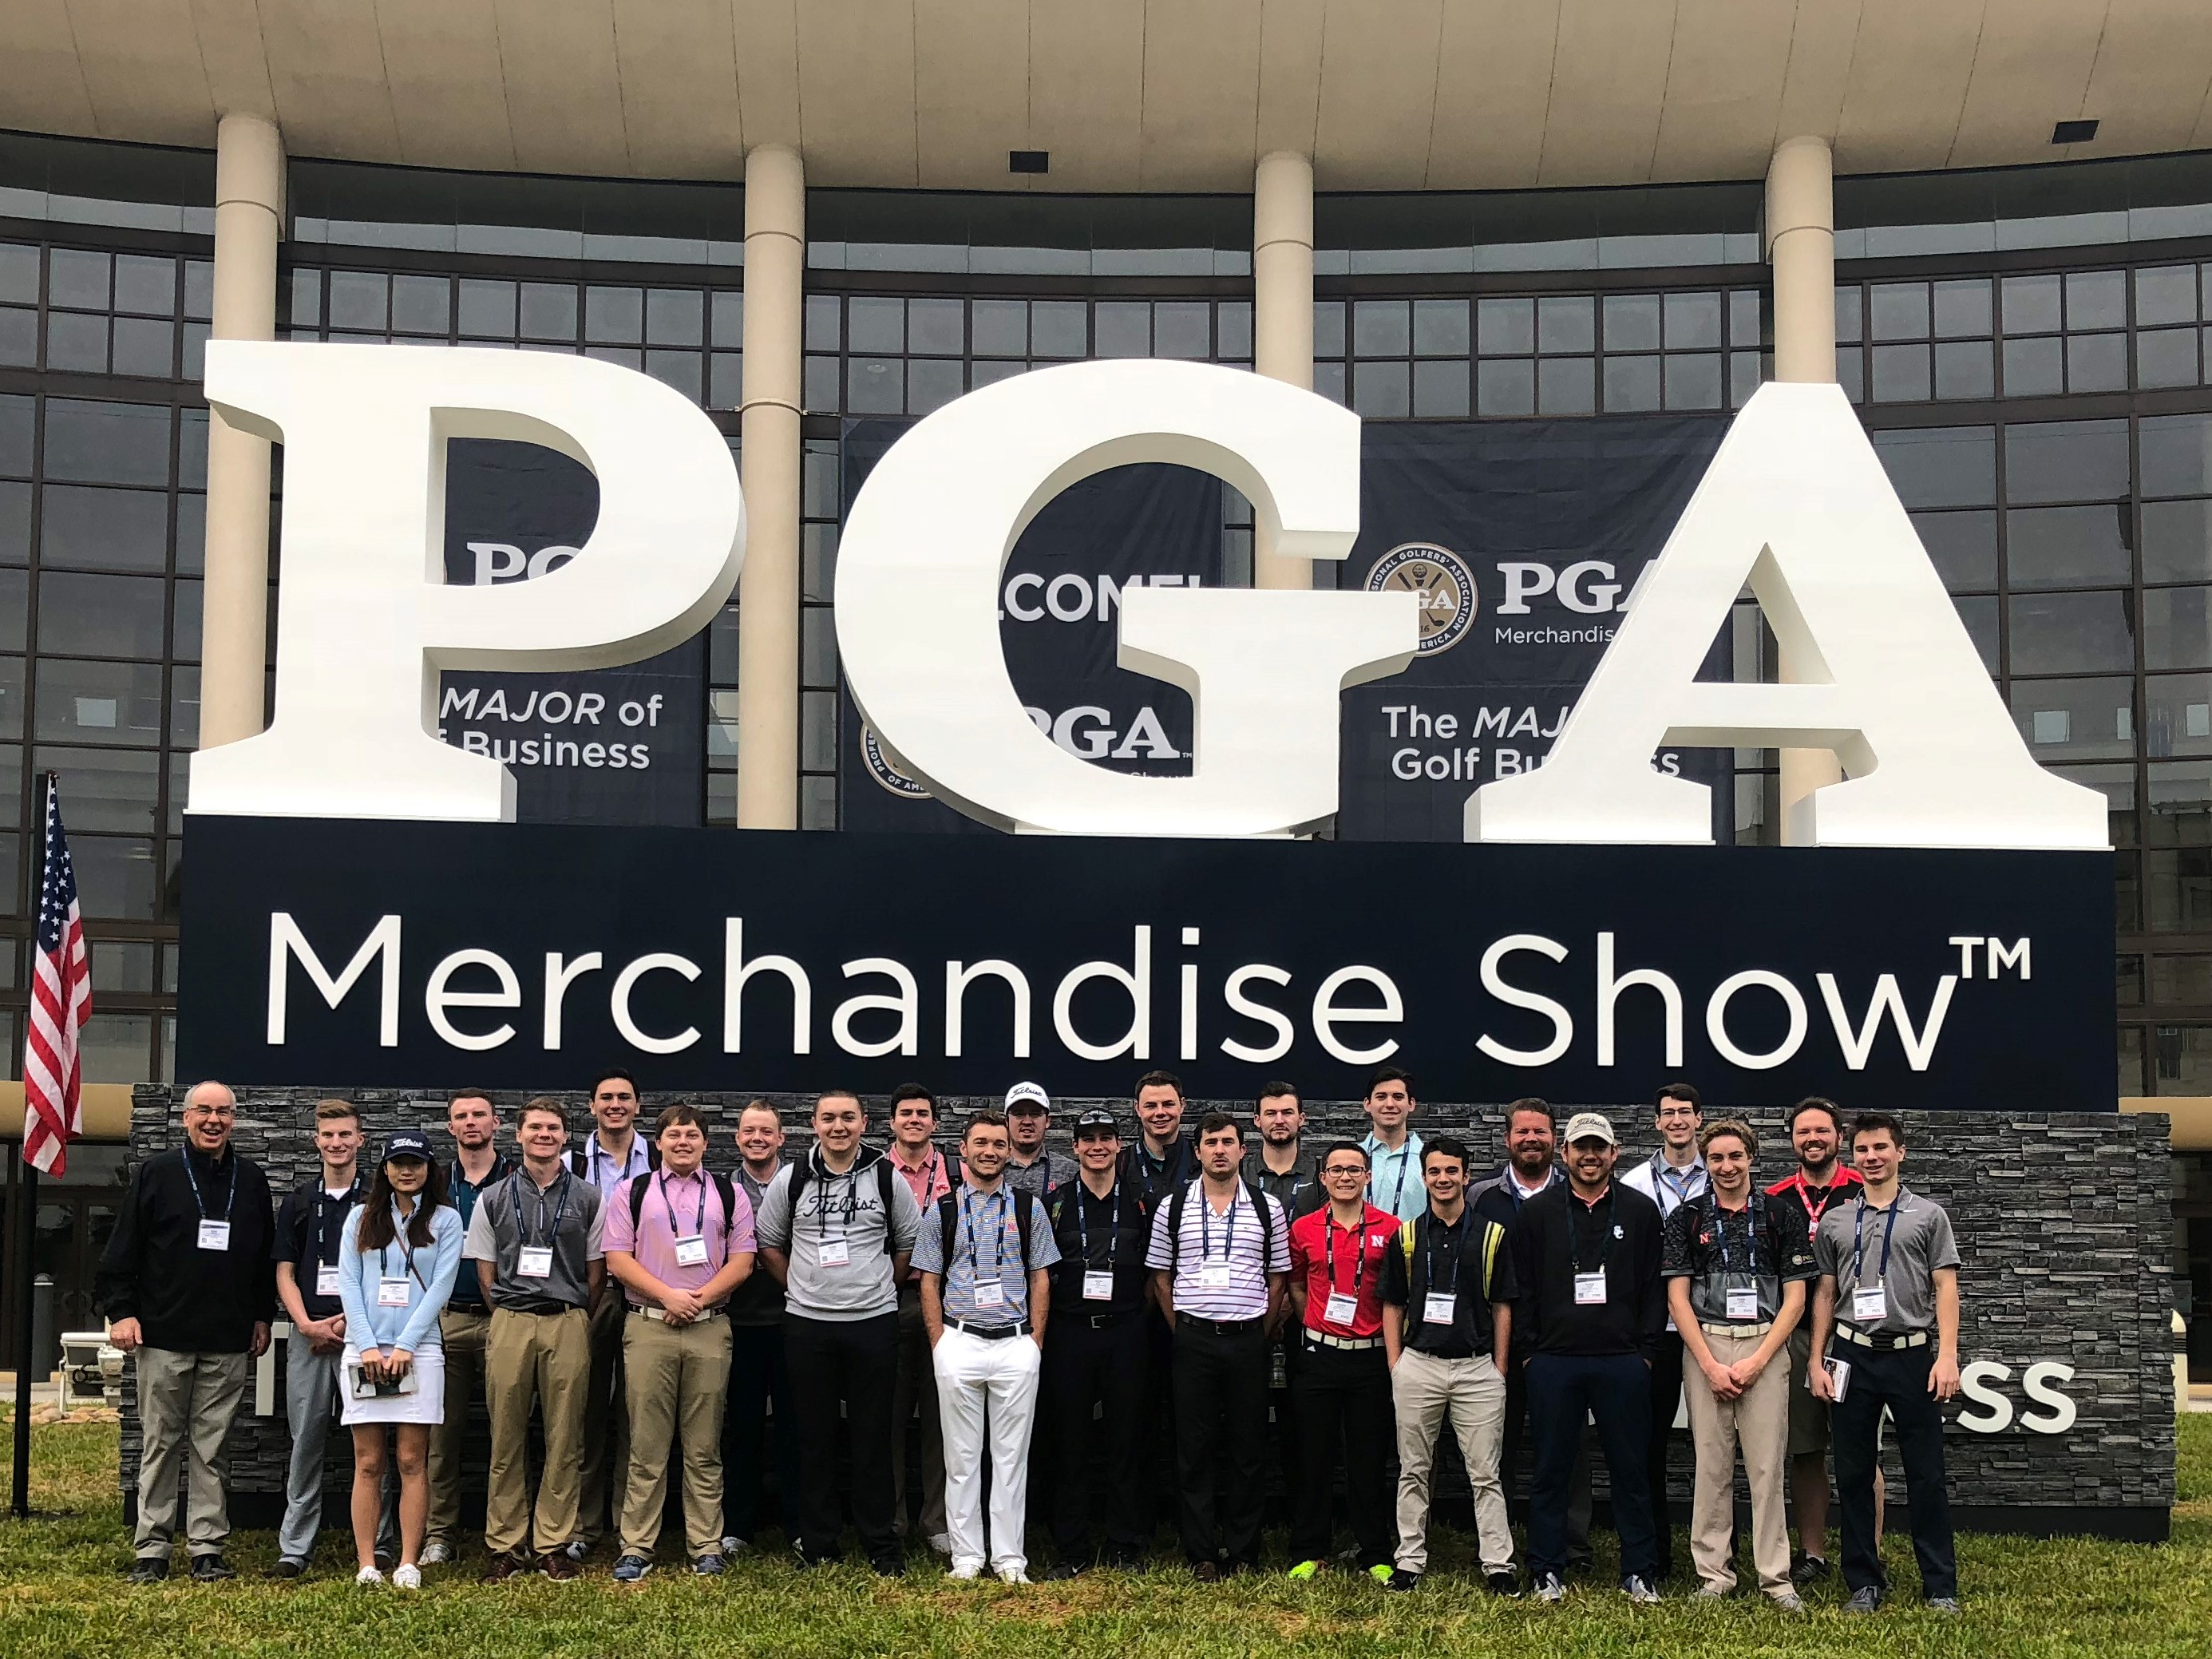 Students and faculty leaders at the 2018 Merchandise Show in Orlando, Florida